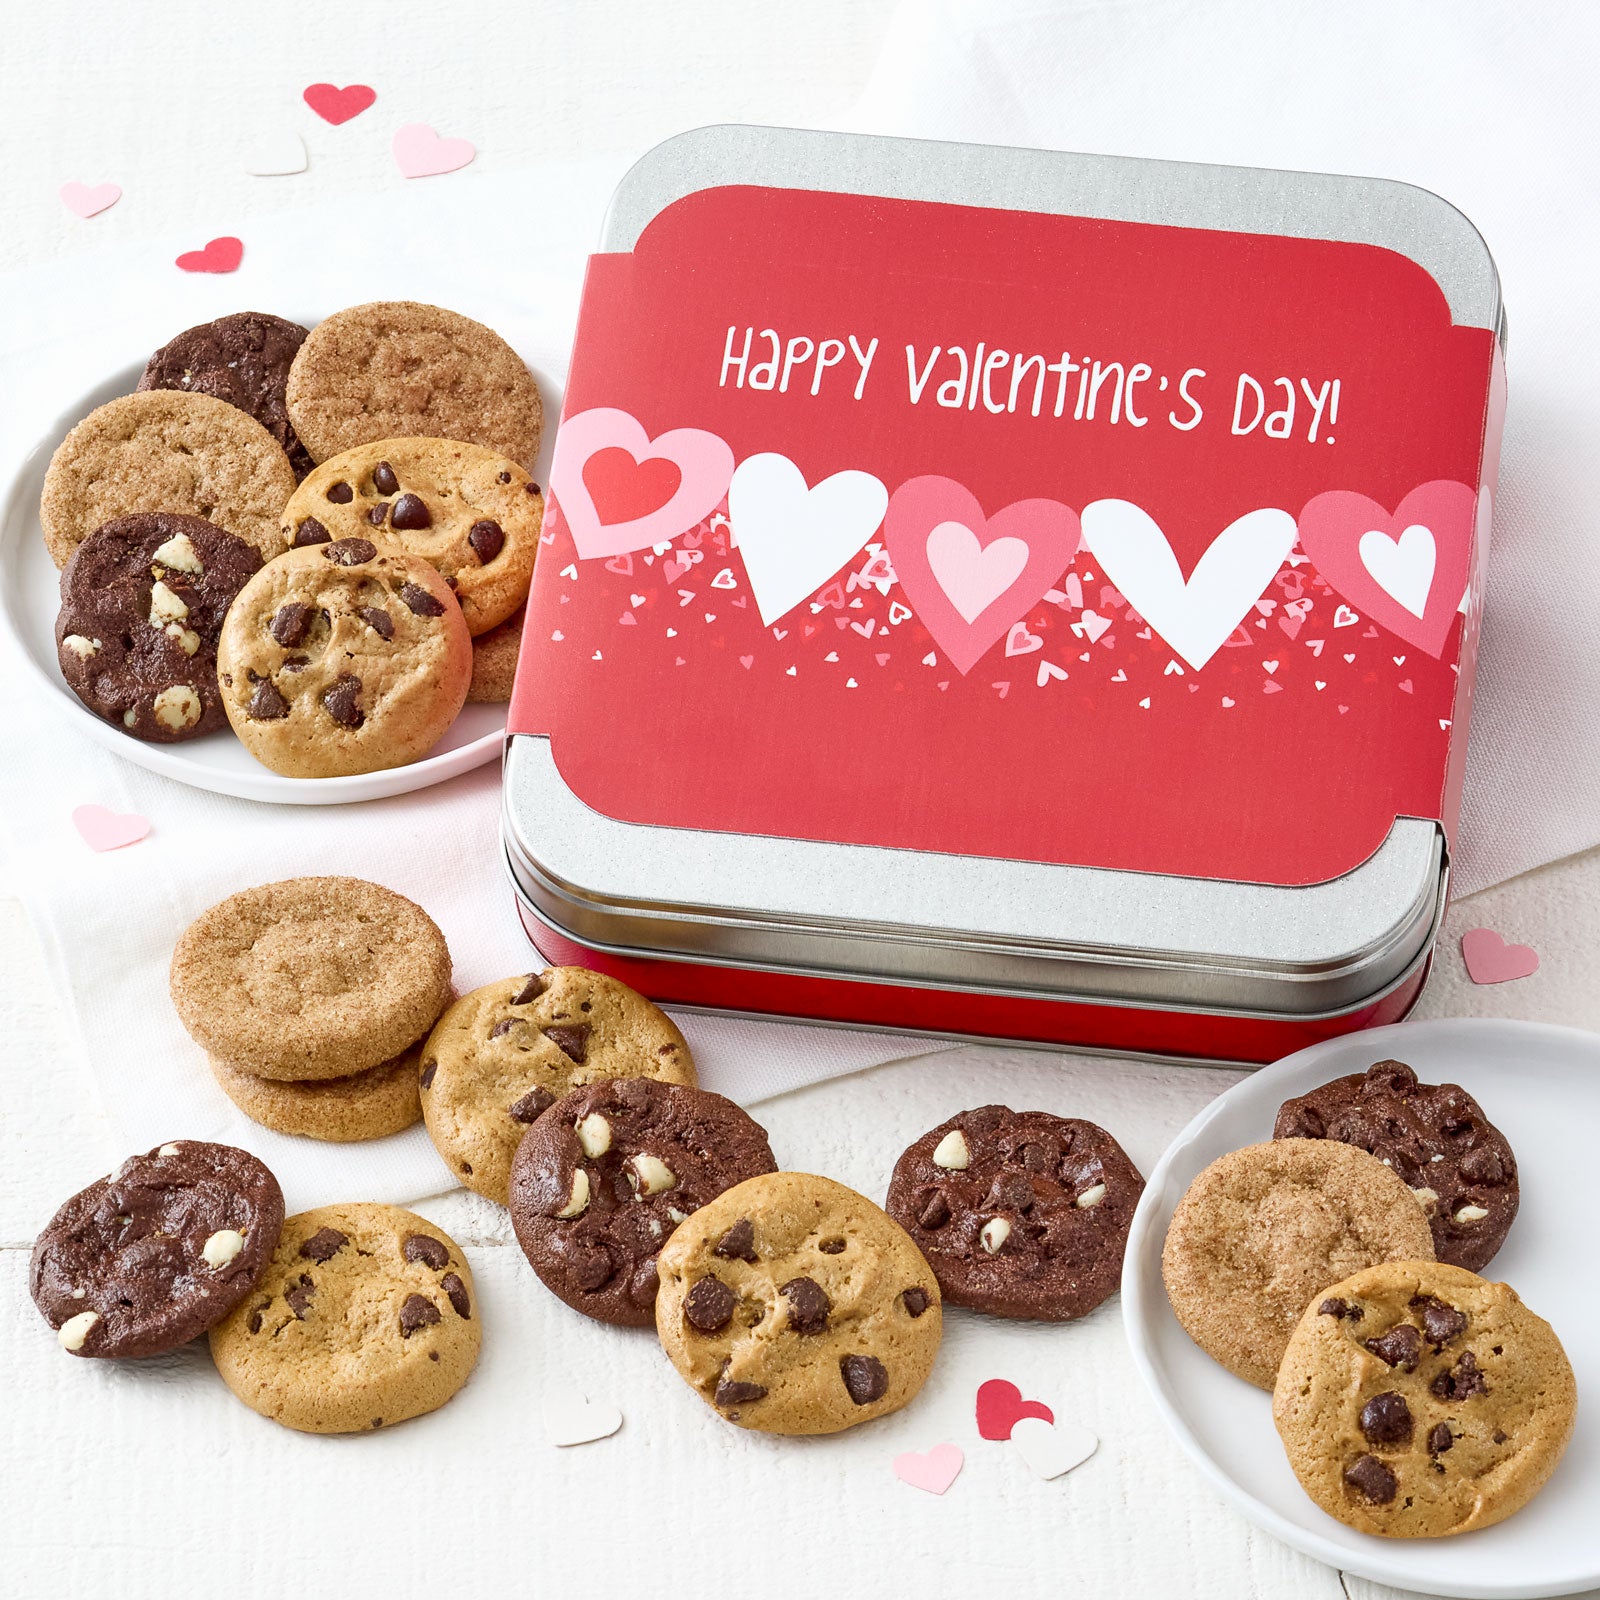 A small gift tin with a Happy Valentine's Day's sleeve and surrounded by an assortment of Nibblers.